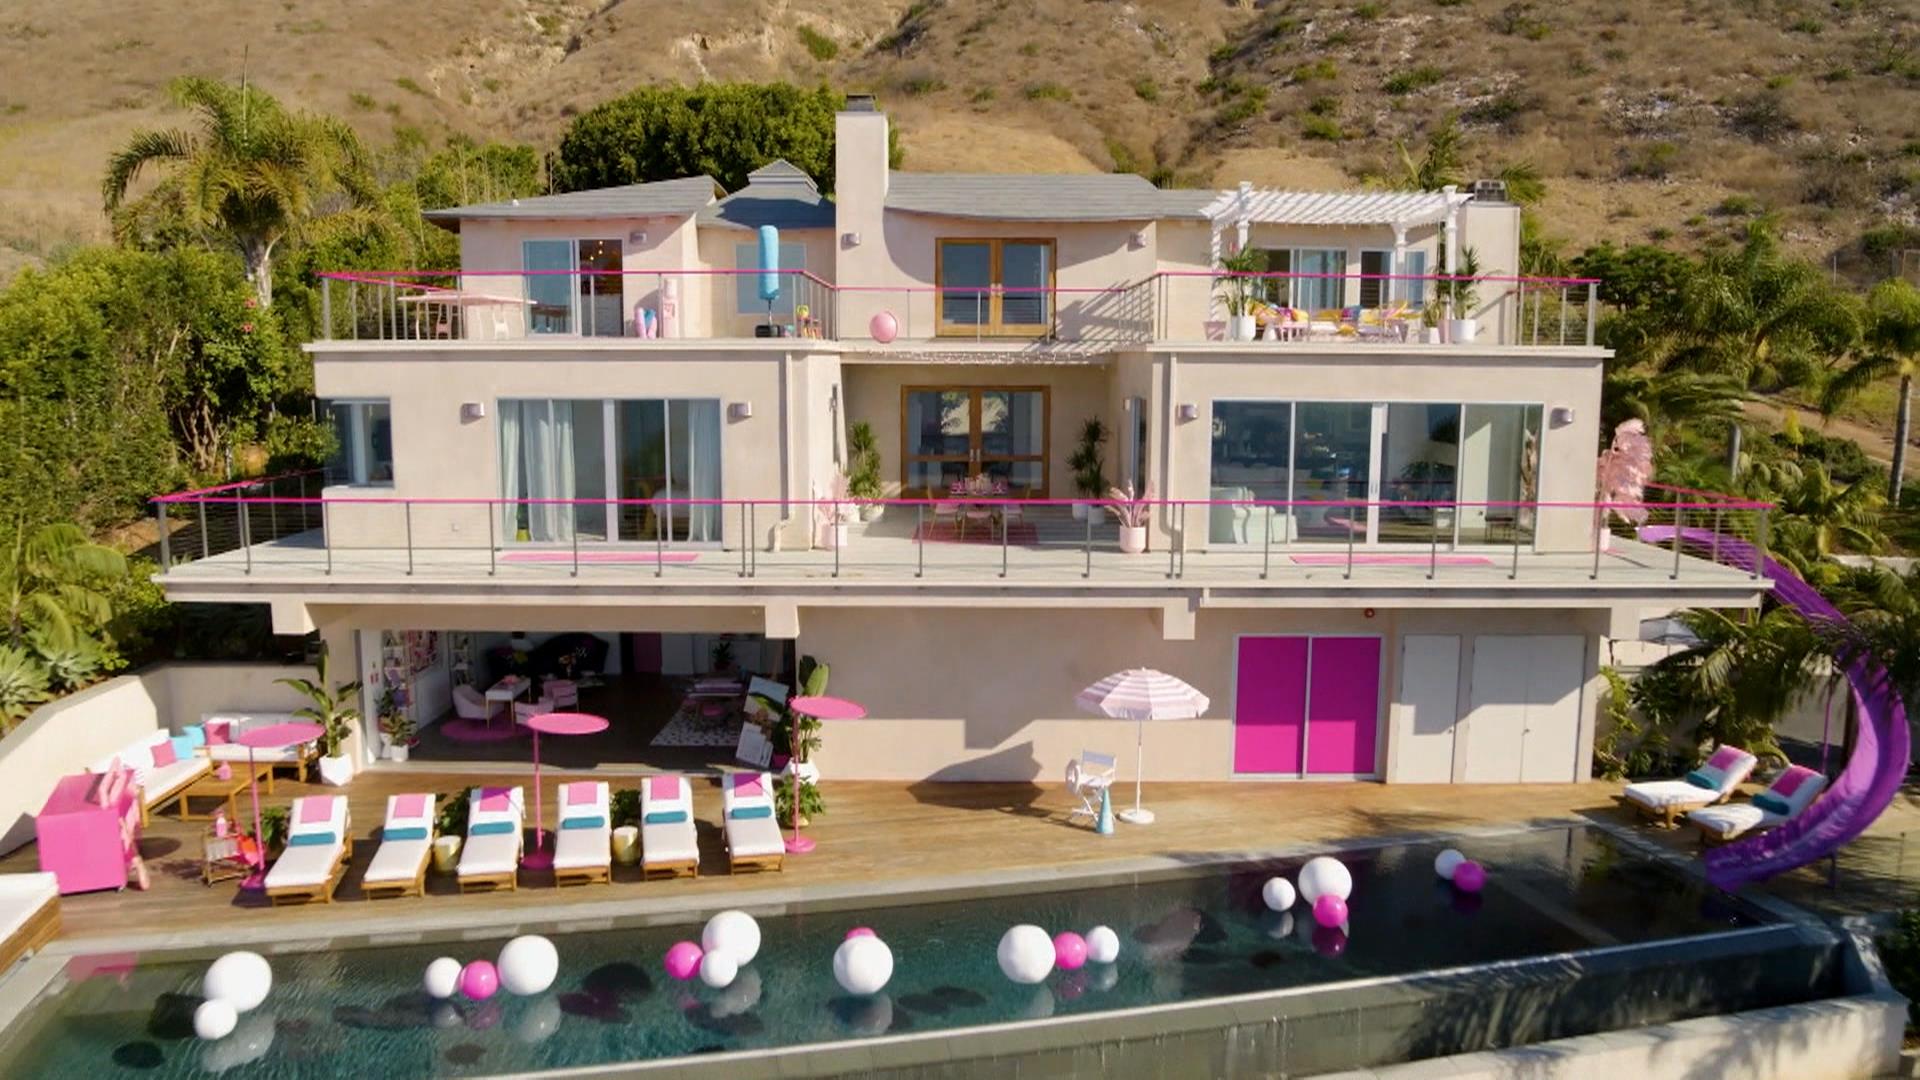 the real life Barbie's House in Malibu